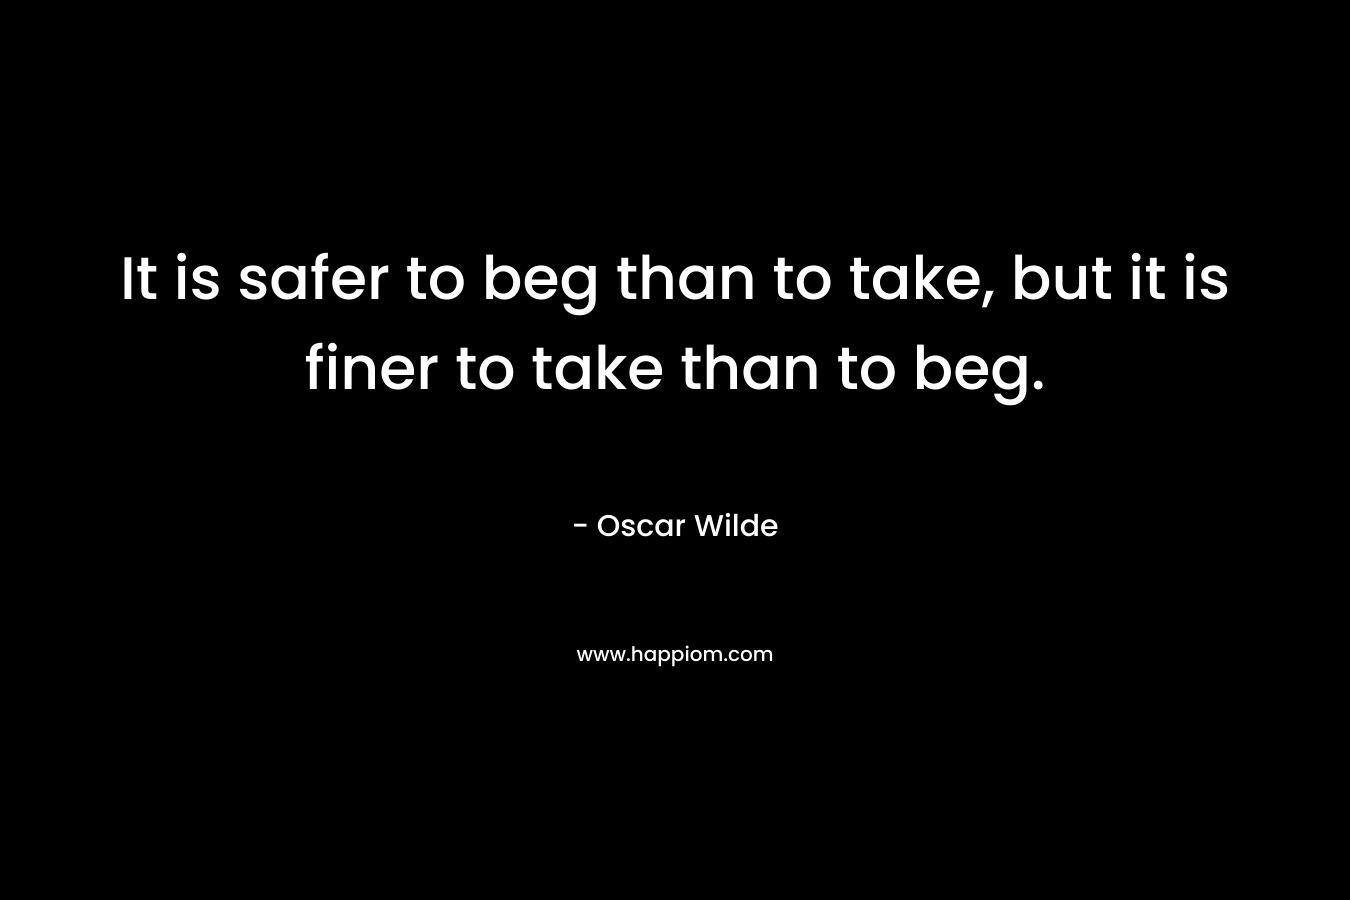 It is safer to beg than to take, but it is finer to take than to beg.